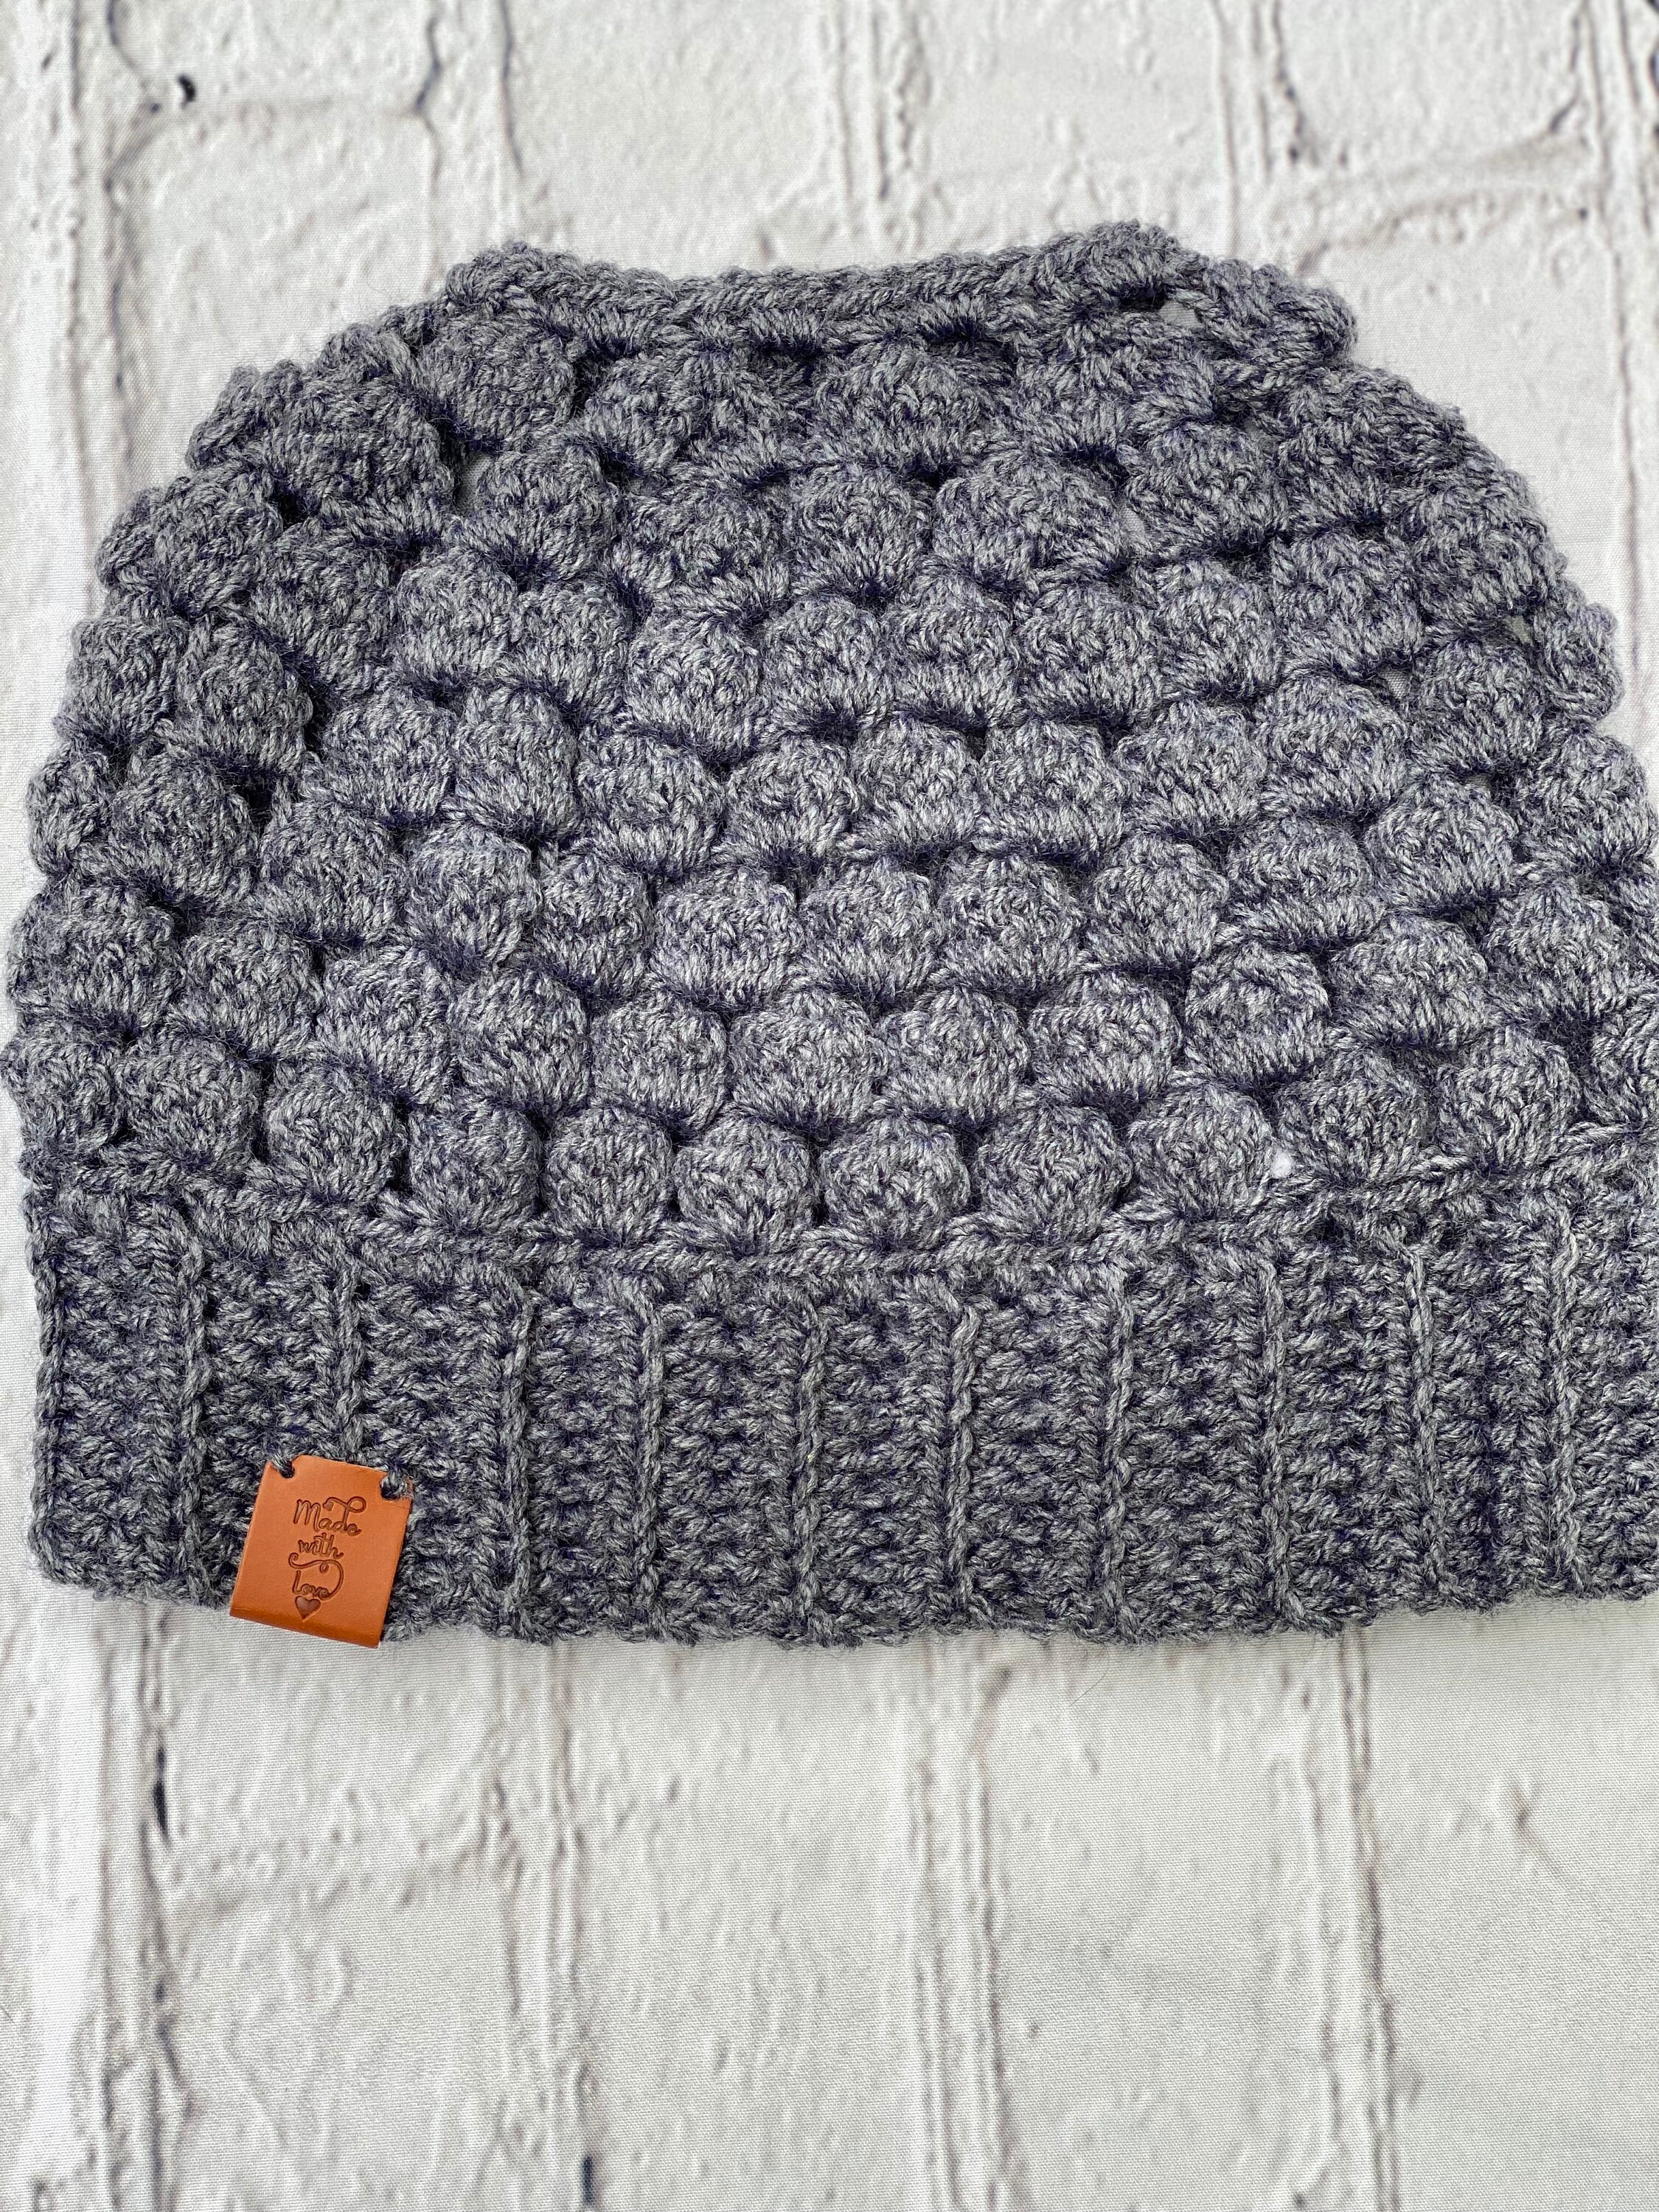 April Hand Crochet Light Grey Hat With Pom – TOILE